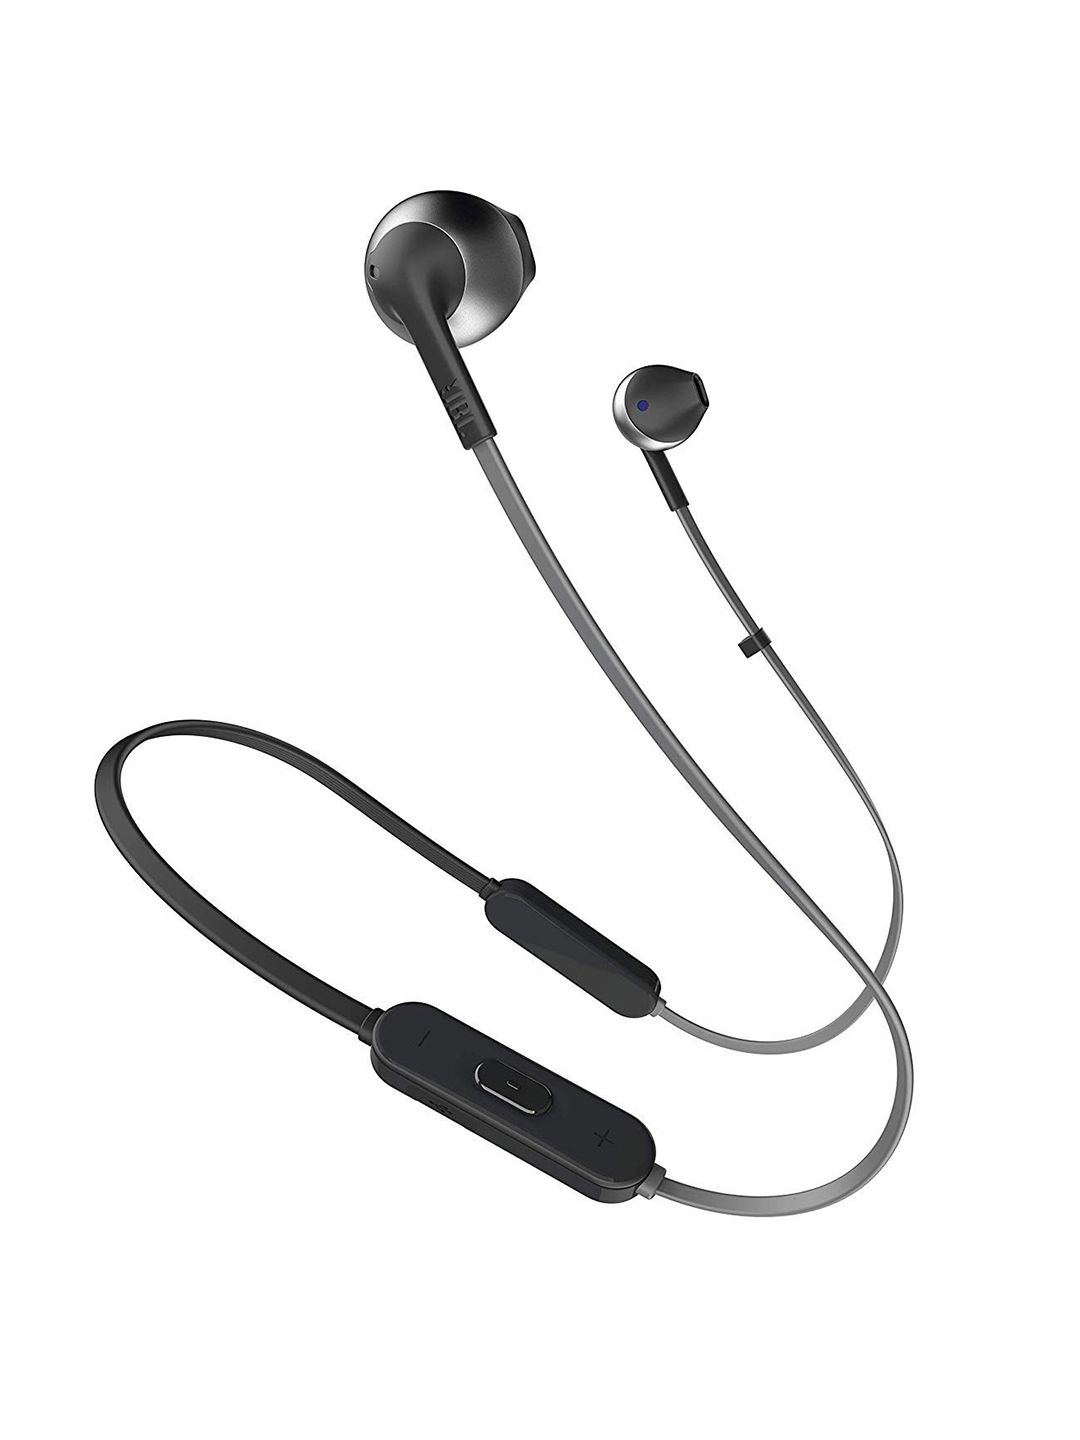 JBL Black T205BT Pure Bass Wireless Metal Earbud Headphones with Mic Price in India